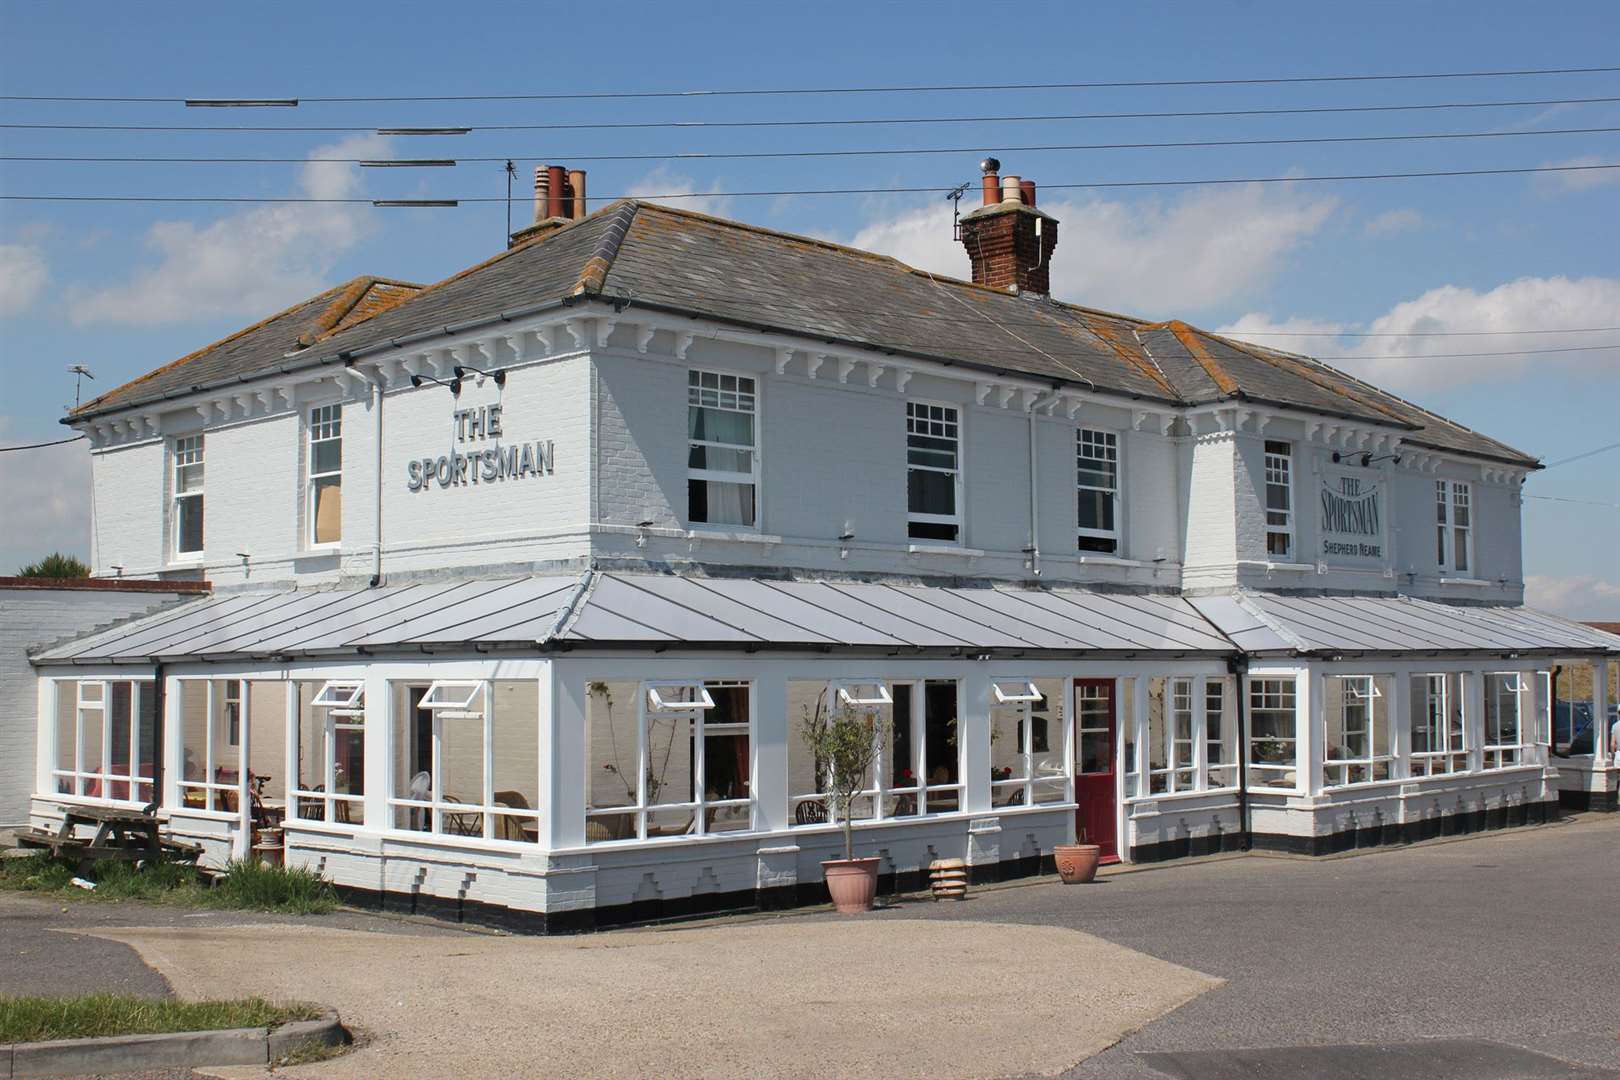 The Sportsman in Seasalter clinched the top spot